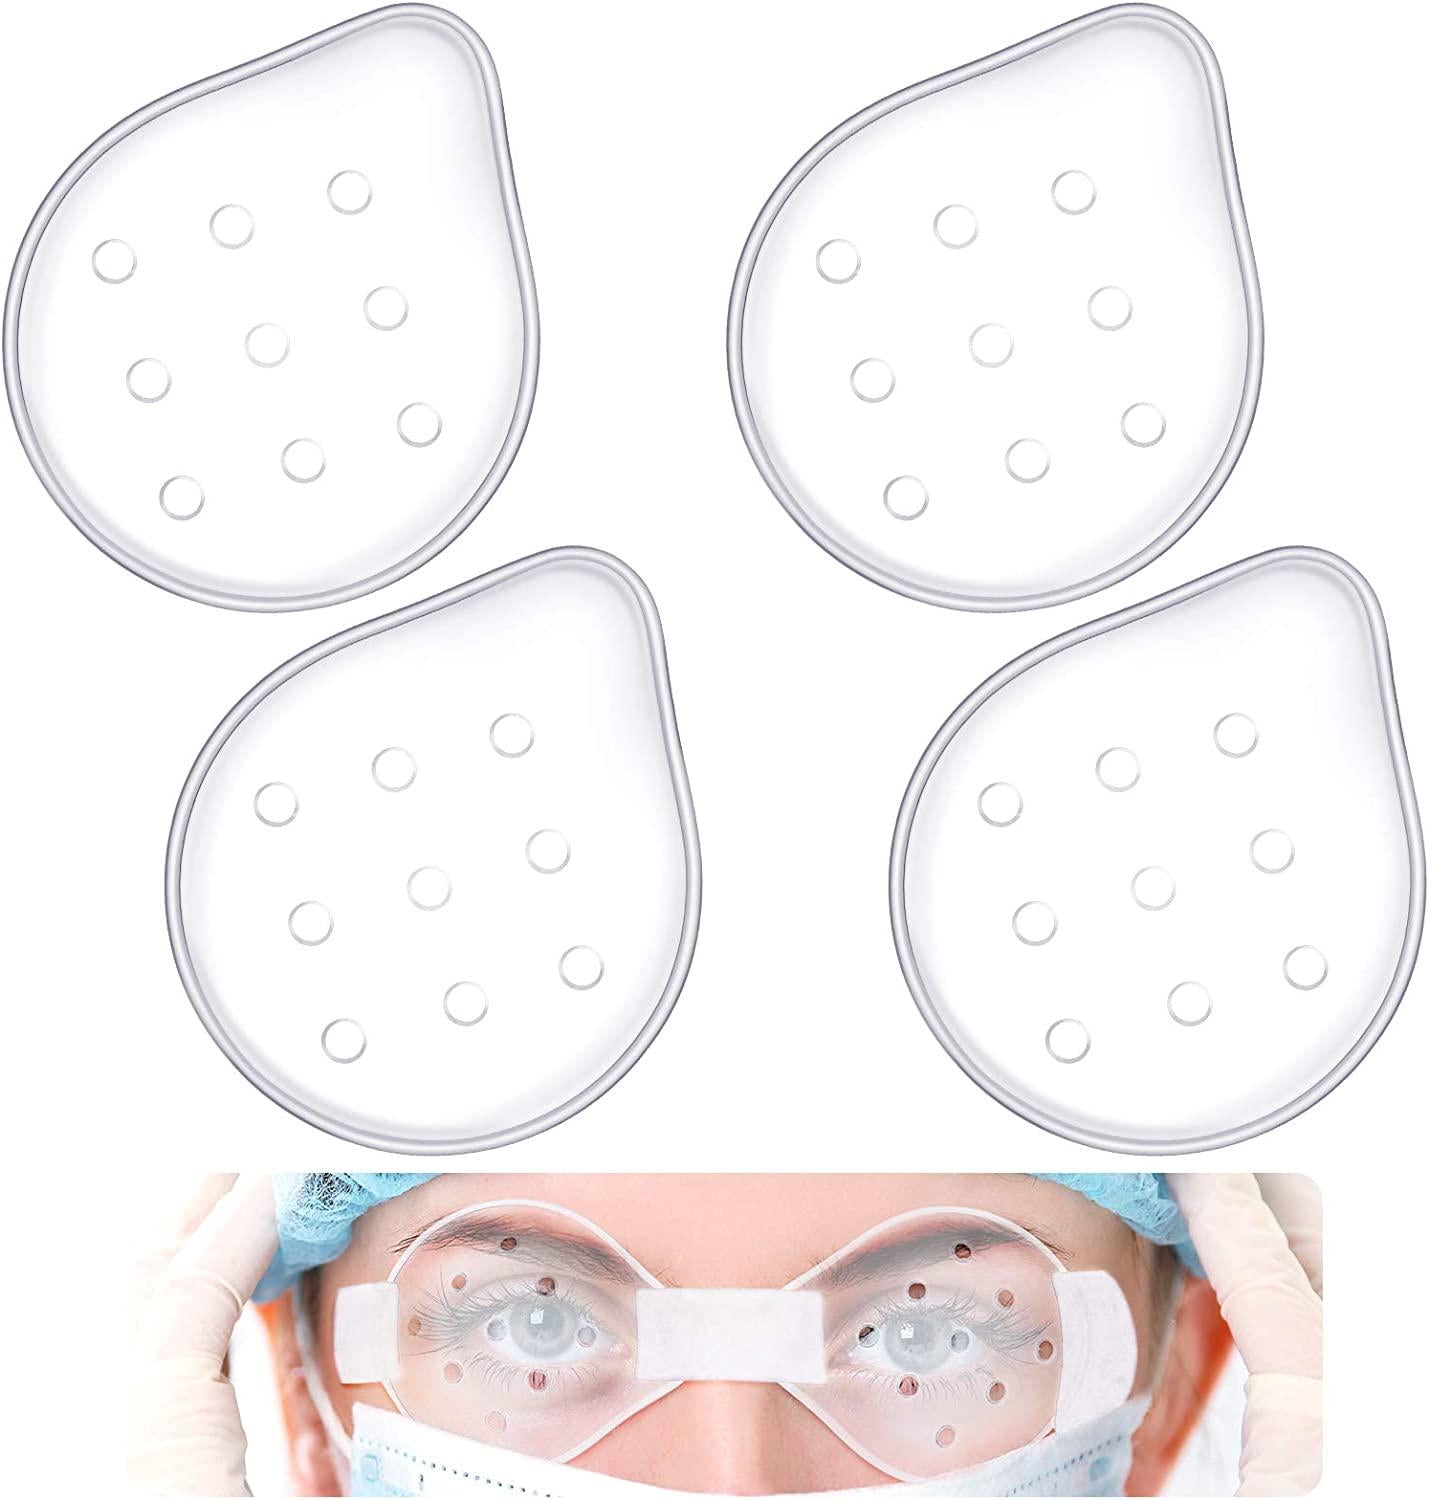 Lothee, Lothee 4 Pieces Plastic Holes Eye Shields Plastic Ventilated Eye Shield Plastic Eye Coverings Transparent Eye Protections Breathable Eye Care Supplies for Men Women to Prevent Sand, Small Gravel